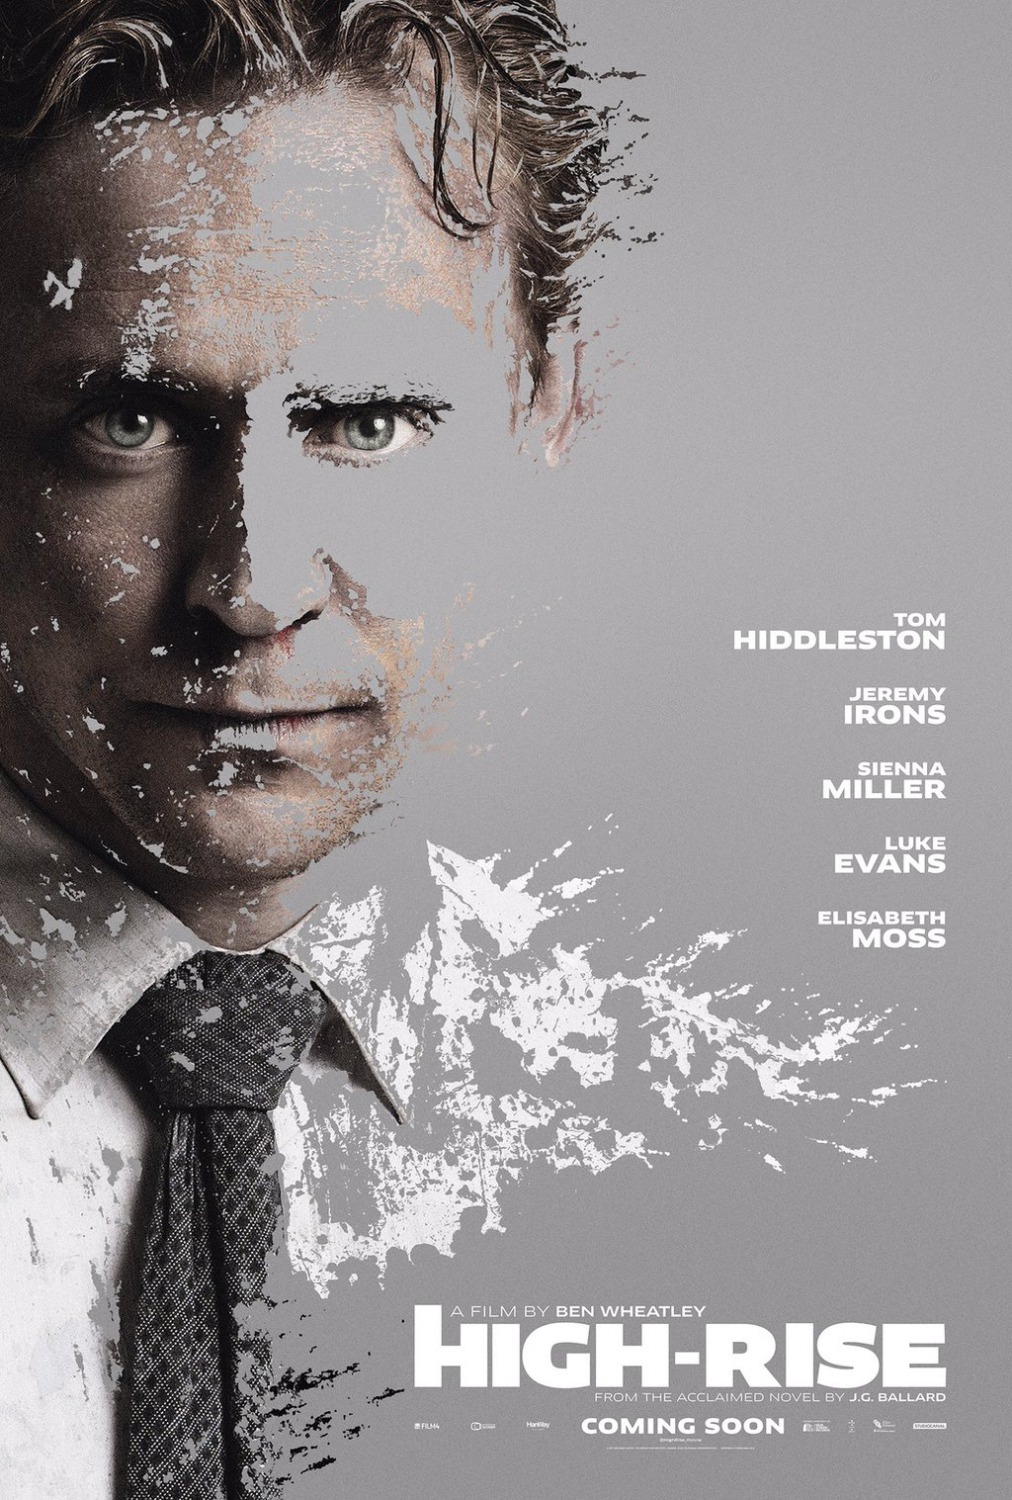 High-Rise new poster features Tom Hiddleston covered in paint - SciFiNow